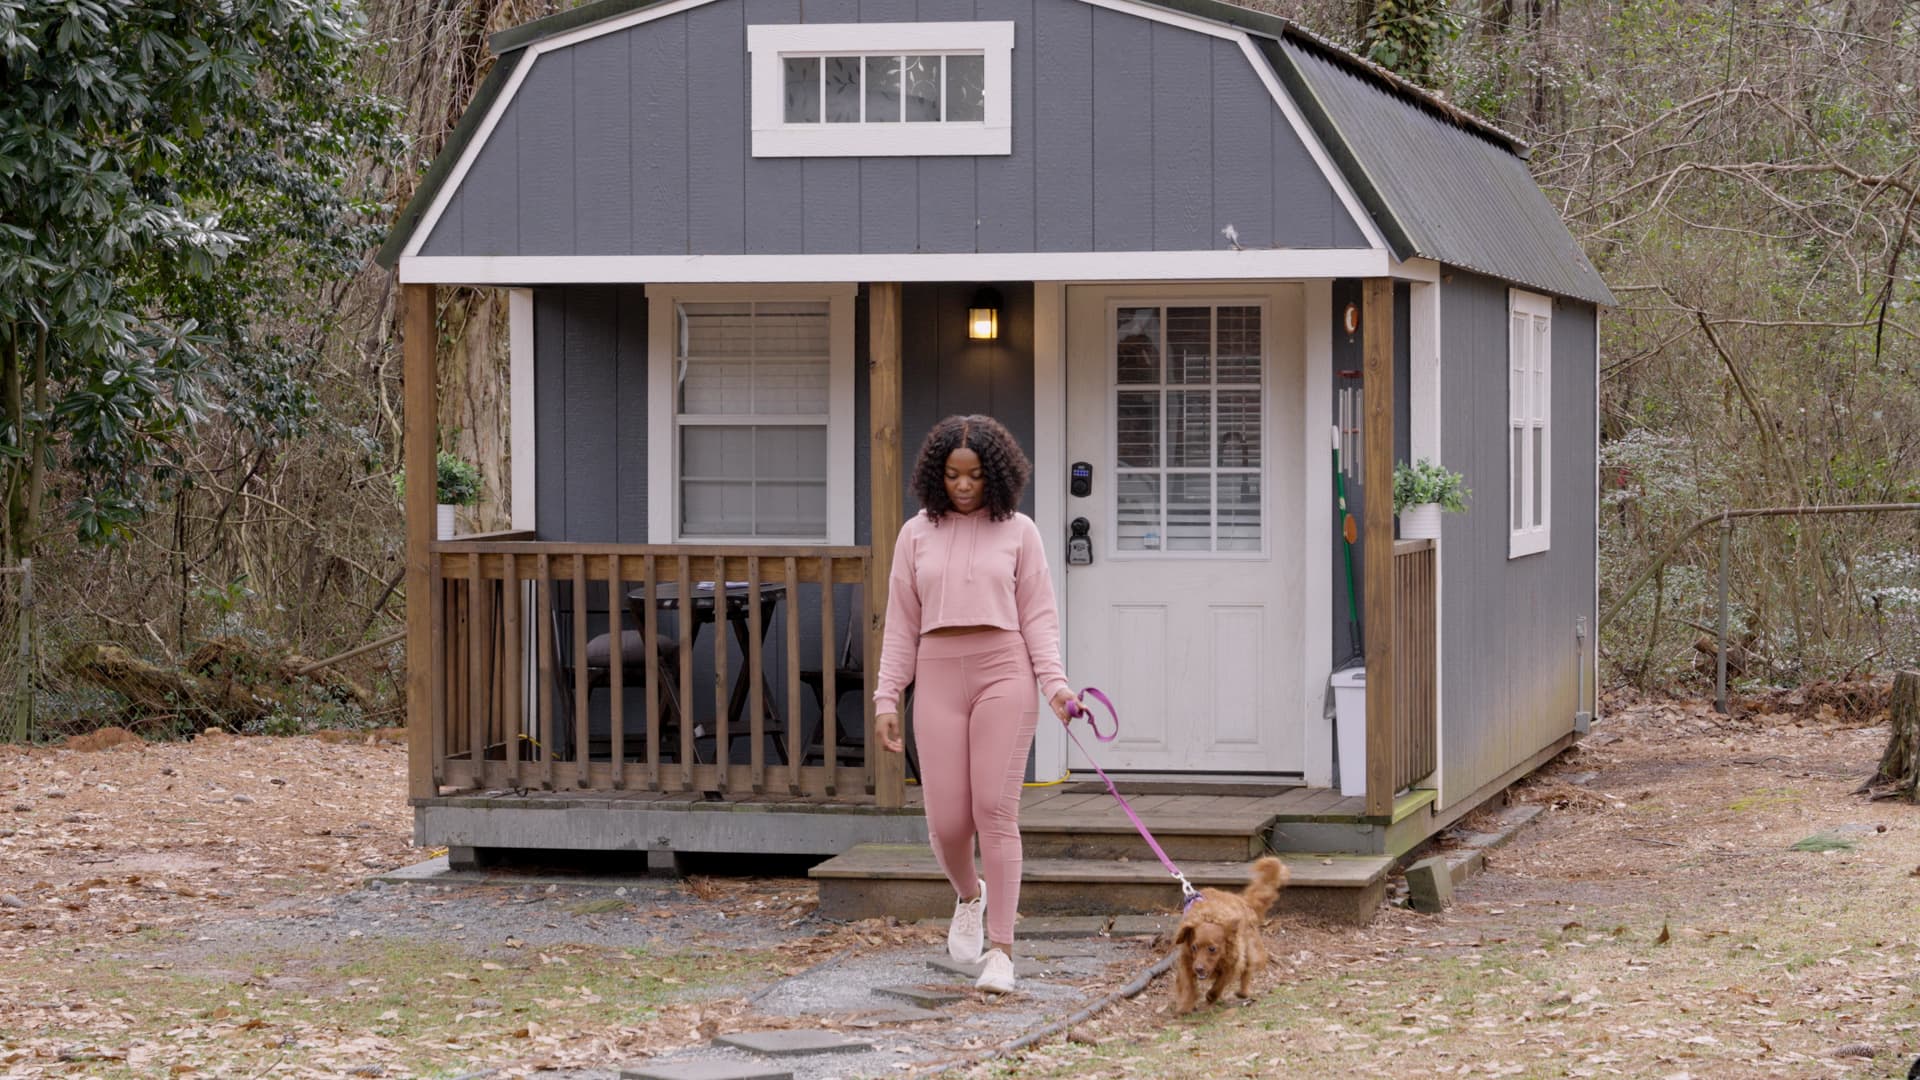 This 26-year-old pays $0 to live in a ‘luxury tiny home’ she built for $35,000 in her backyard—take a look inside